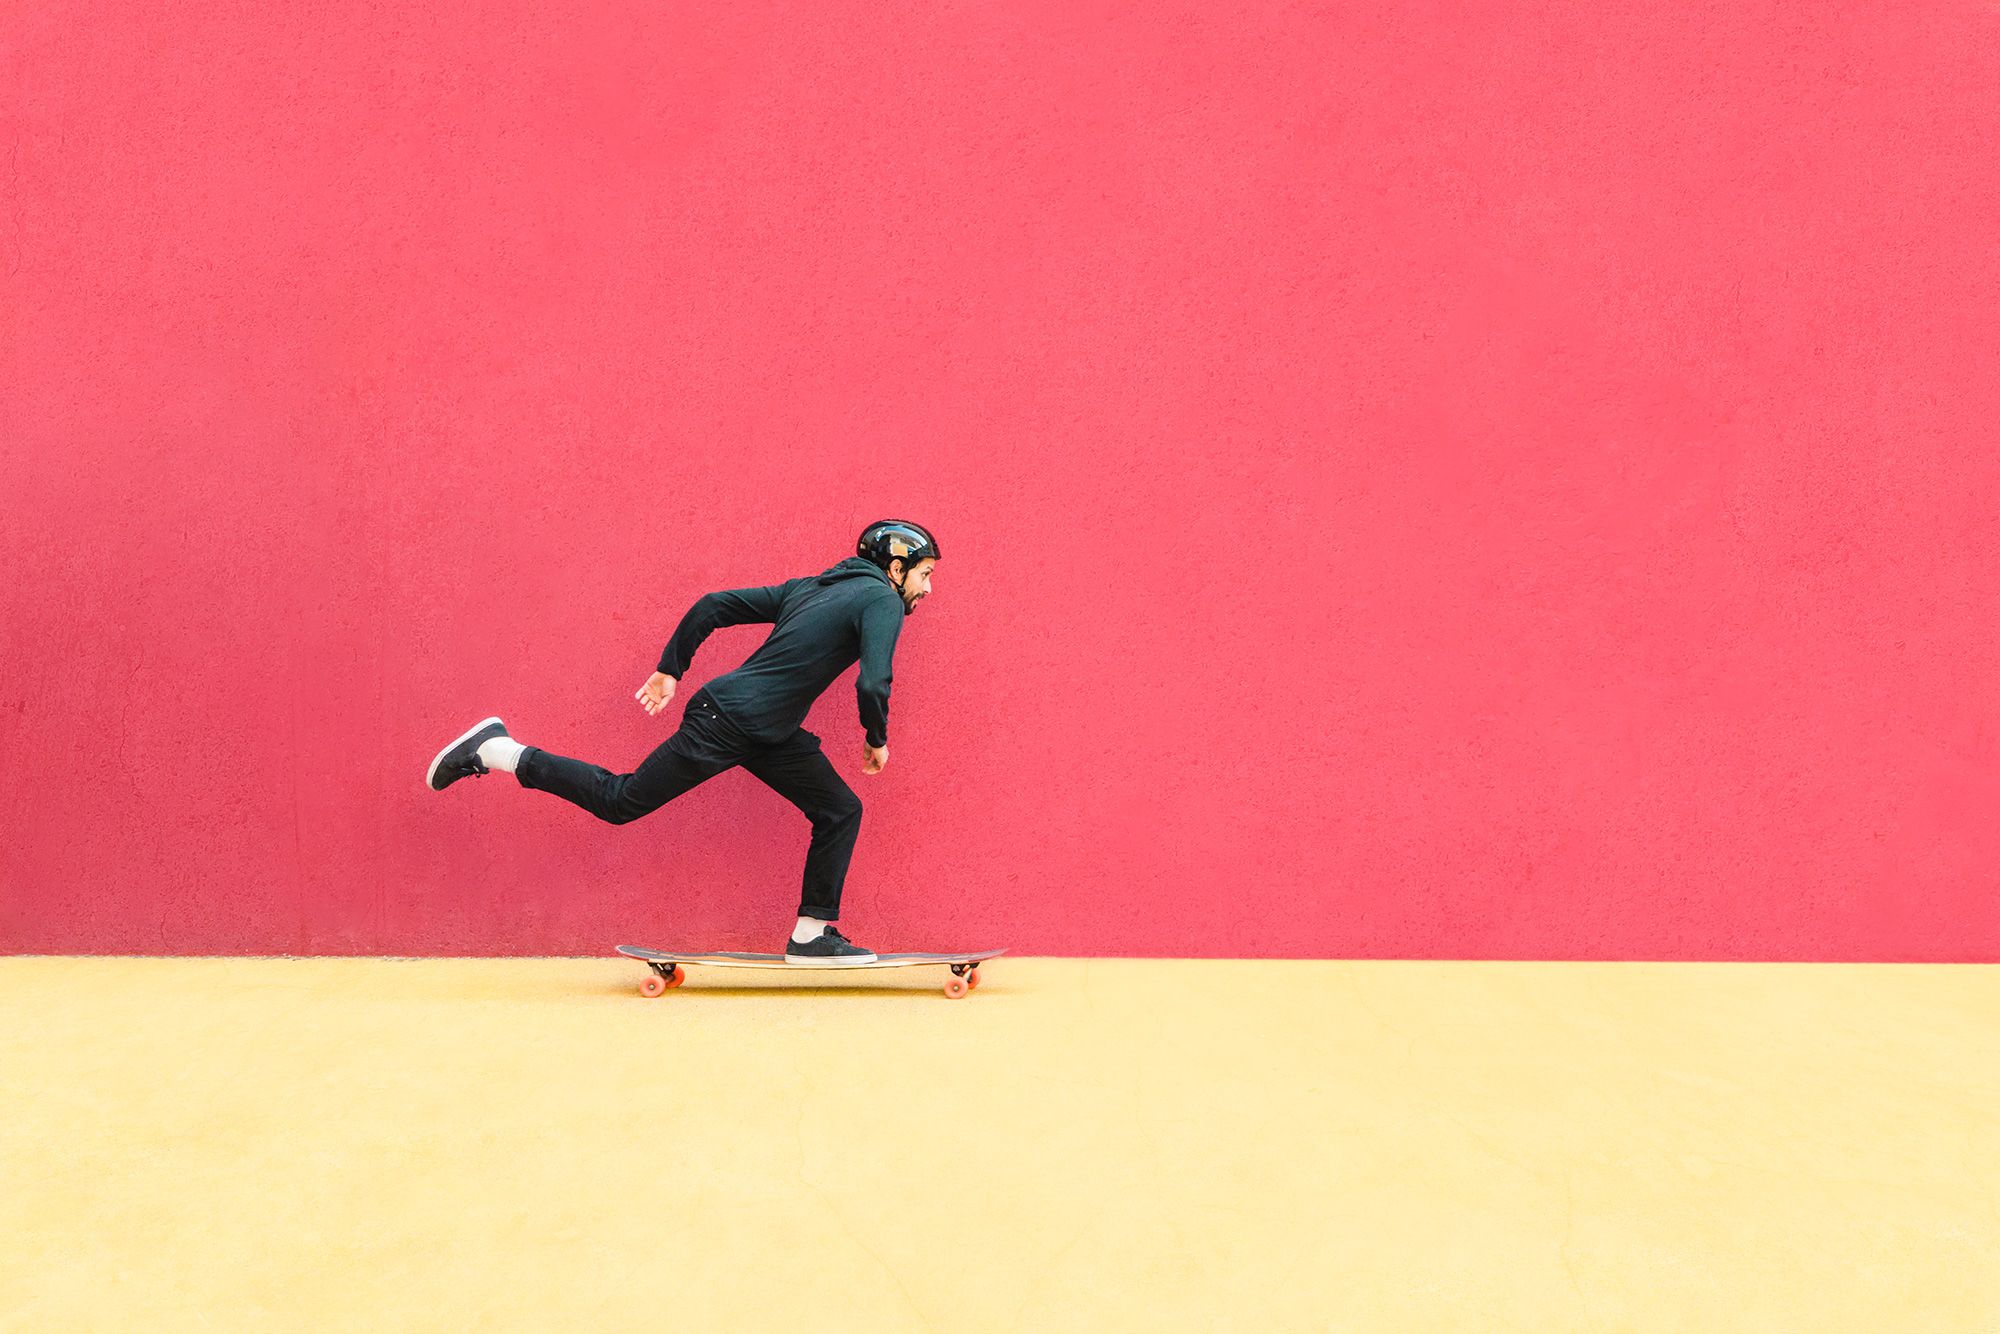 A young man with a beard skateboarding in front of a red wall